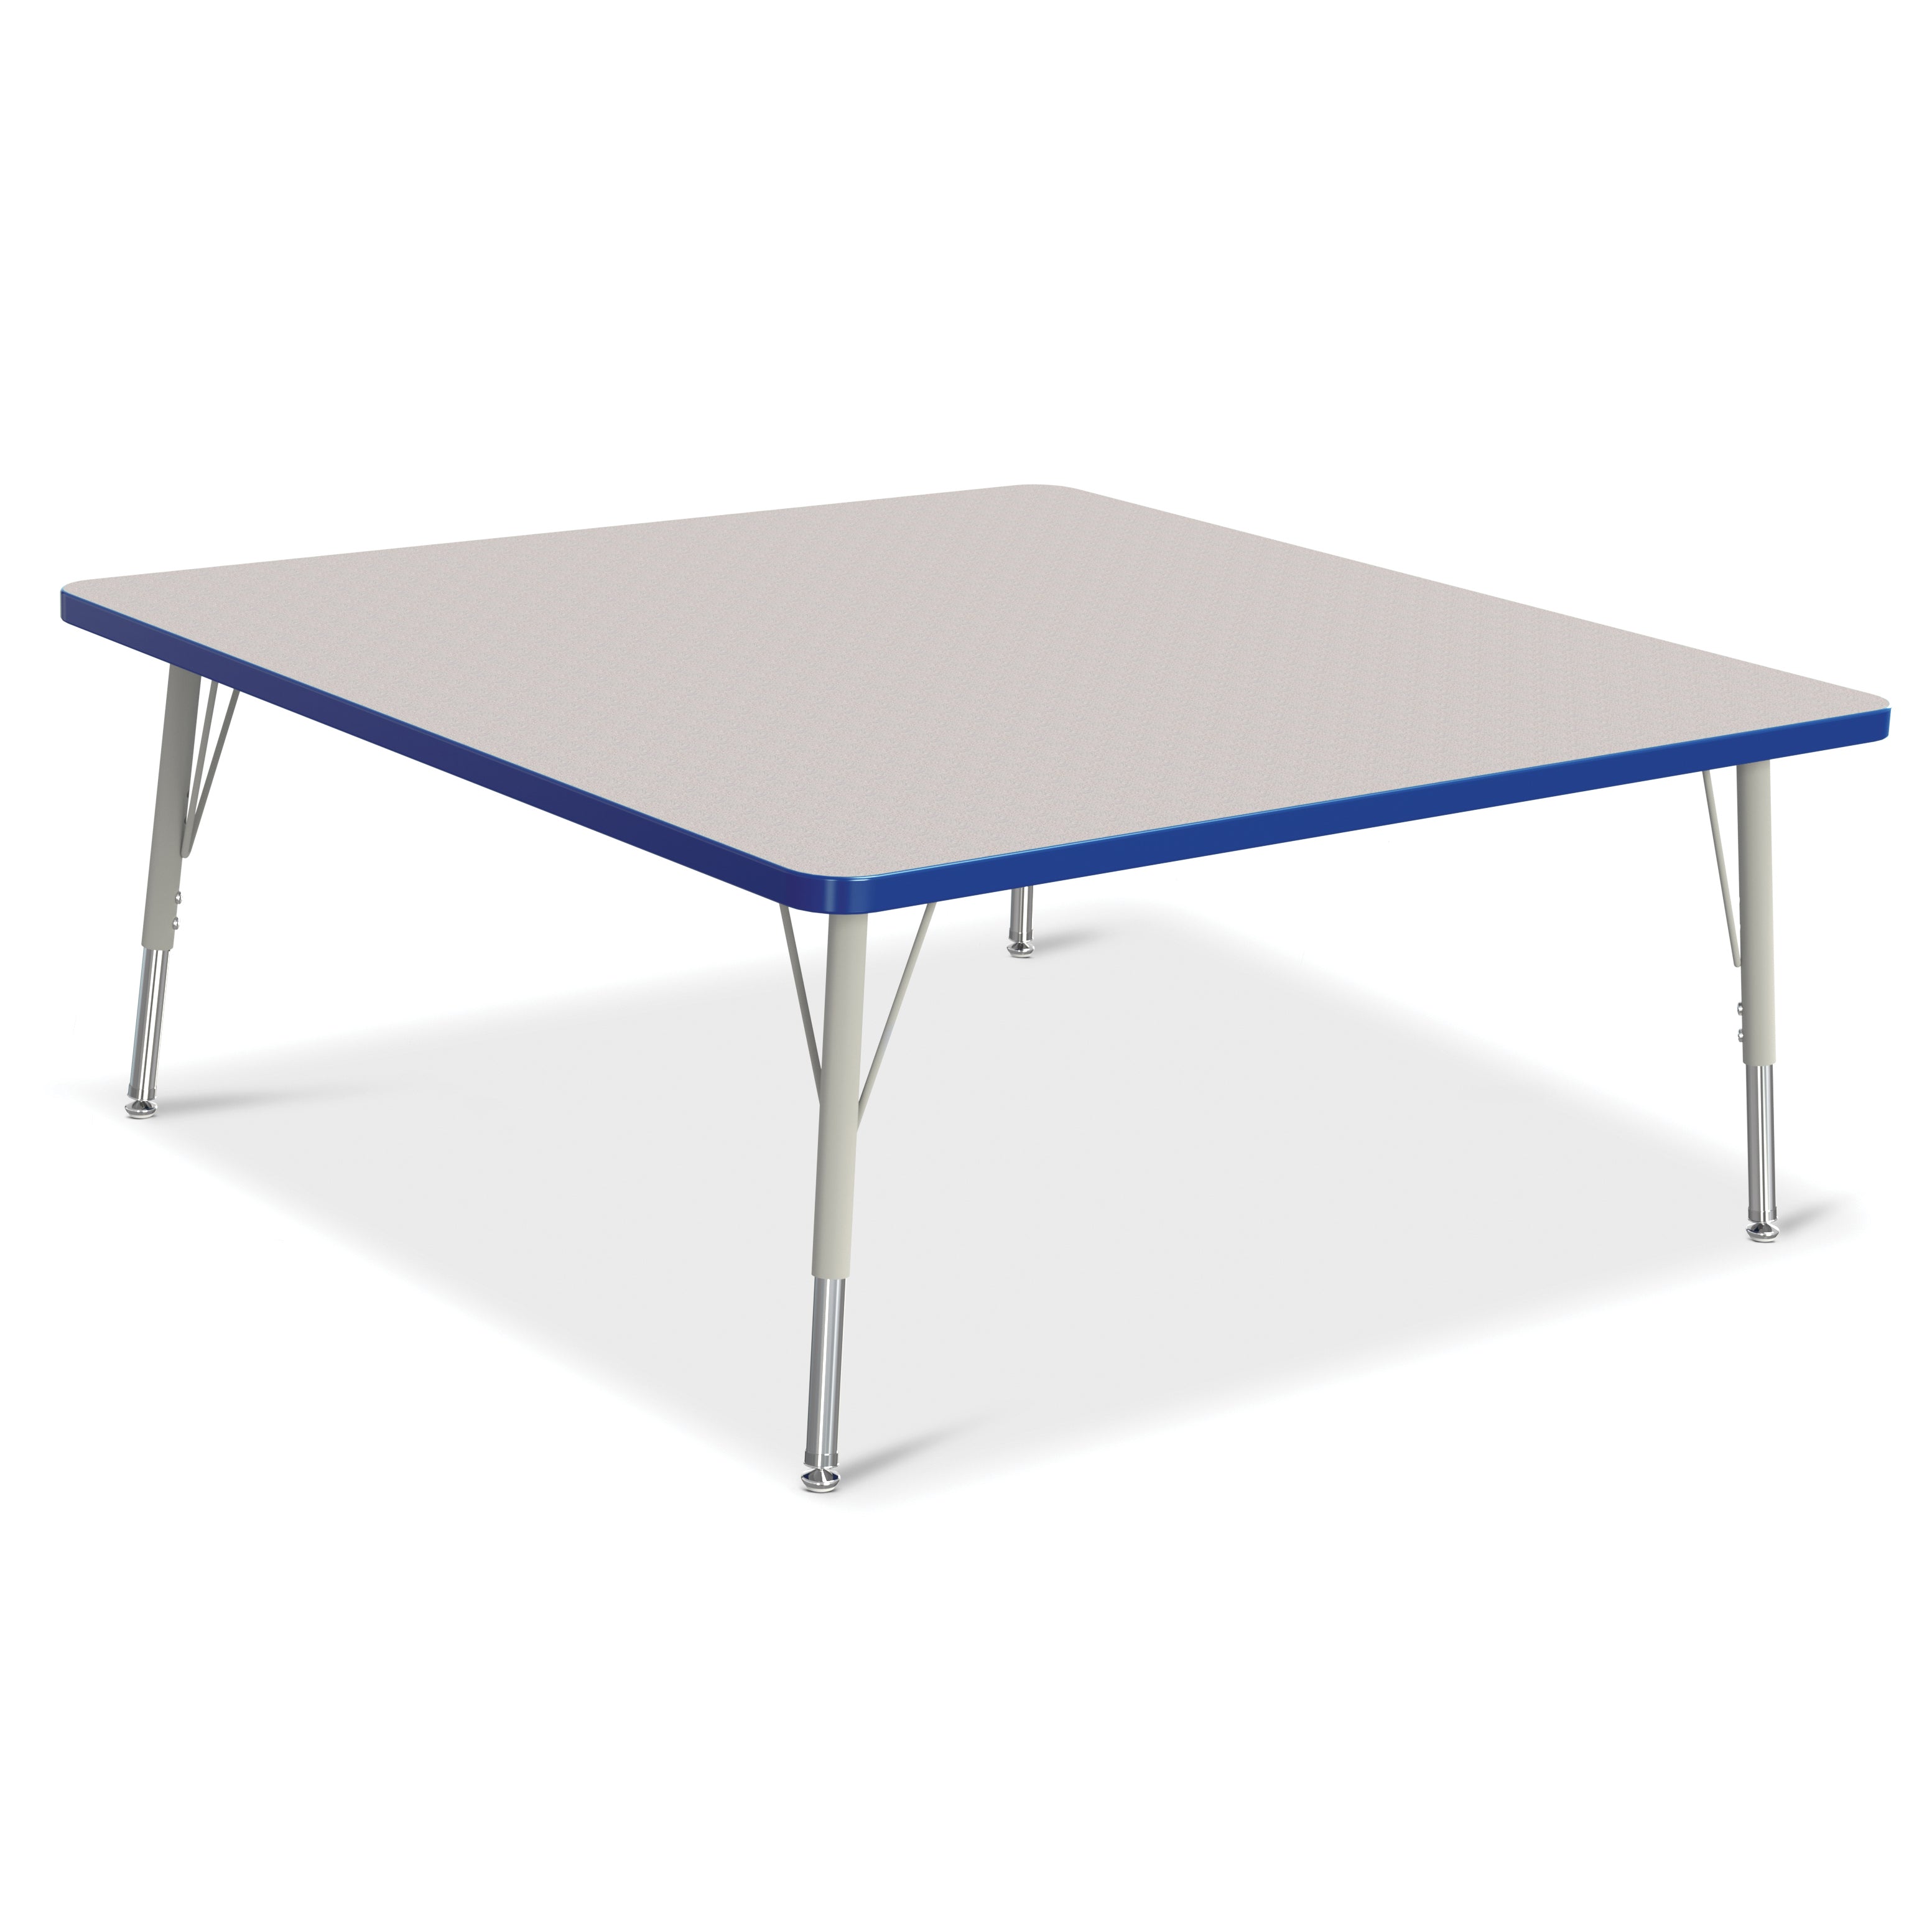 6418JCE003, Berries Square Activity Table - 48" X 48", E-height - Freckled Gray/Blue/Gray